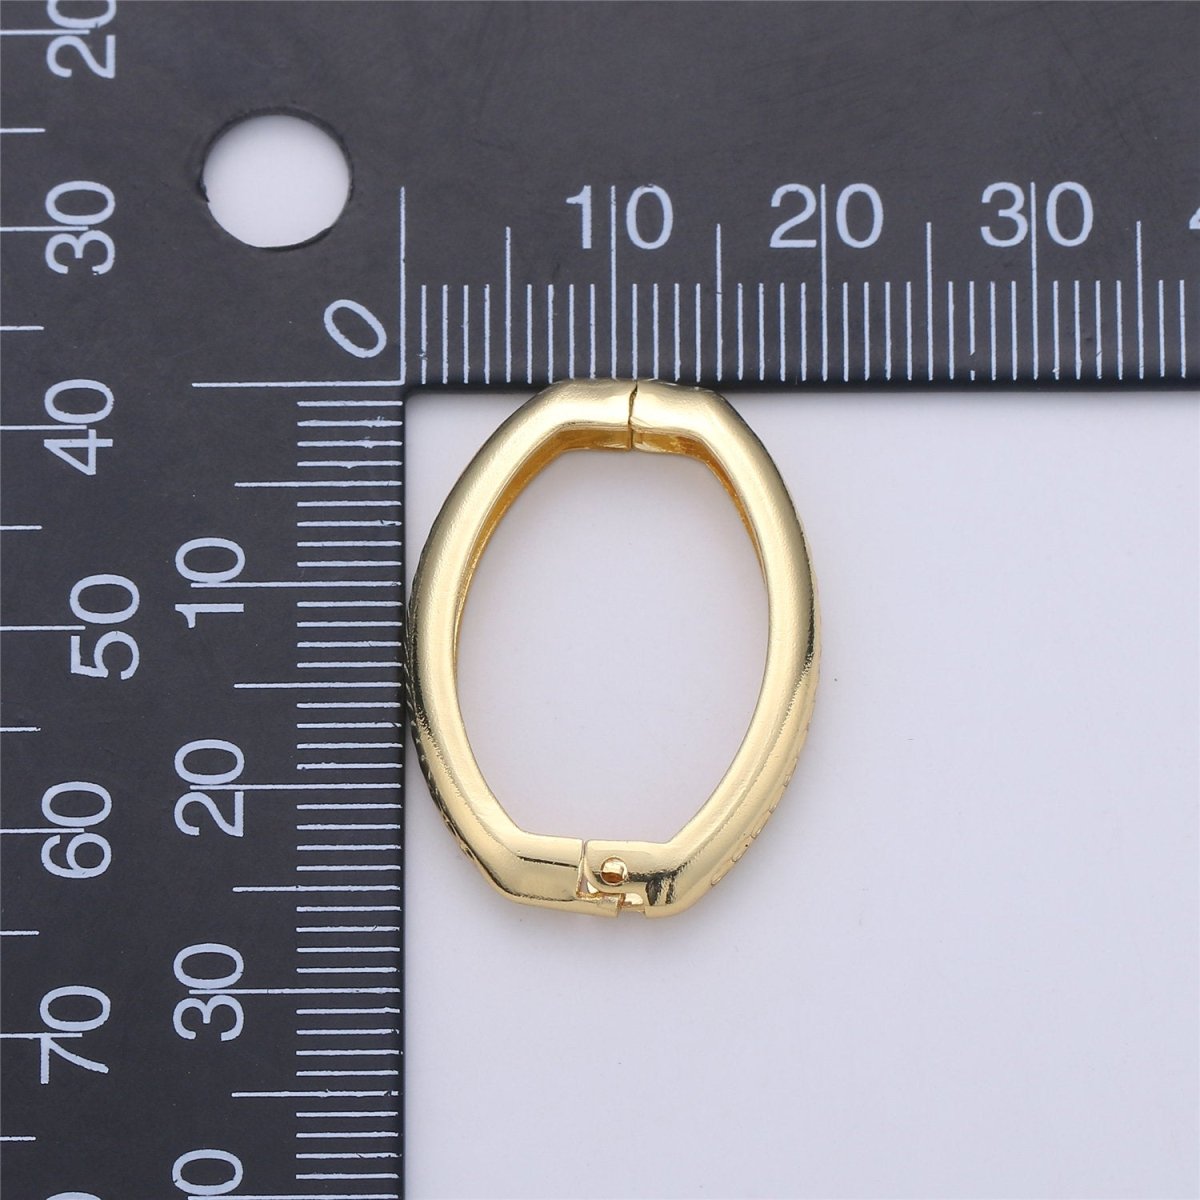 Gold Necklace Clasp, Oval Spring Gate Ring , Textured Oval Gate Ring , Basic Supplies 24k Gold Filled Clasp for Necklace Supply K-393 - DLUXCA